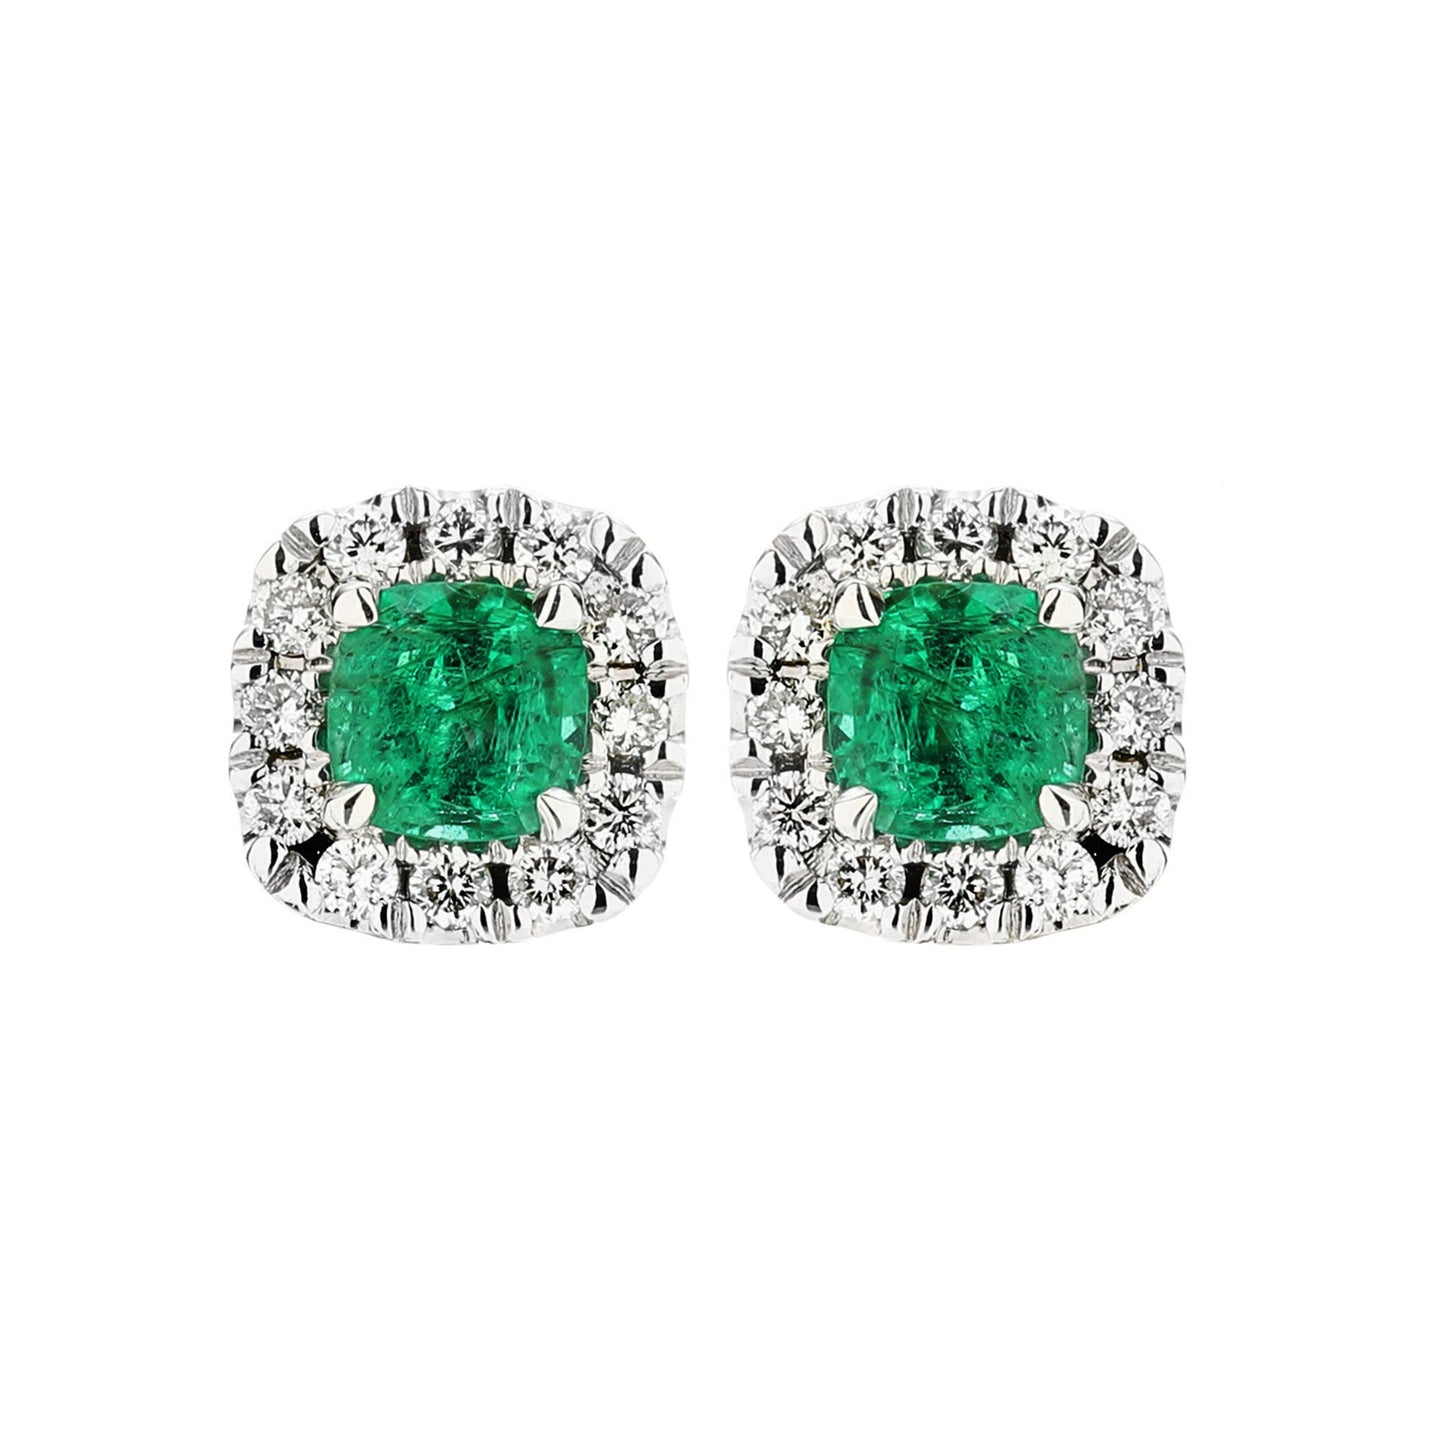 Sabel Collection 14K White Gold Cushion Emerald and Diamond Earrings